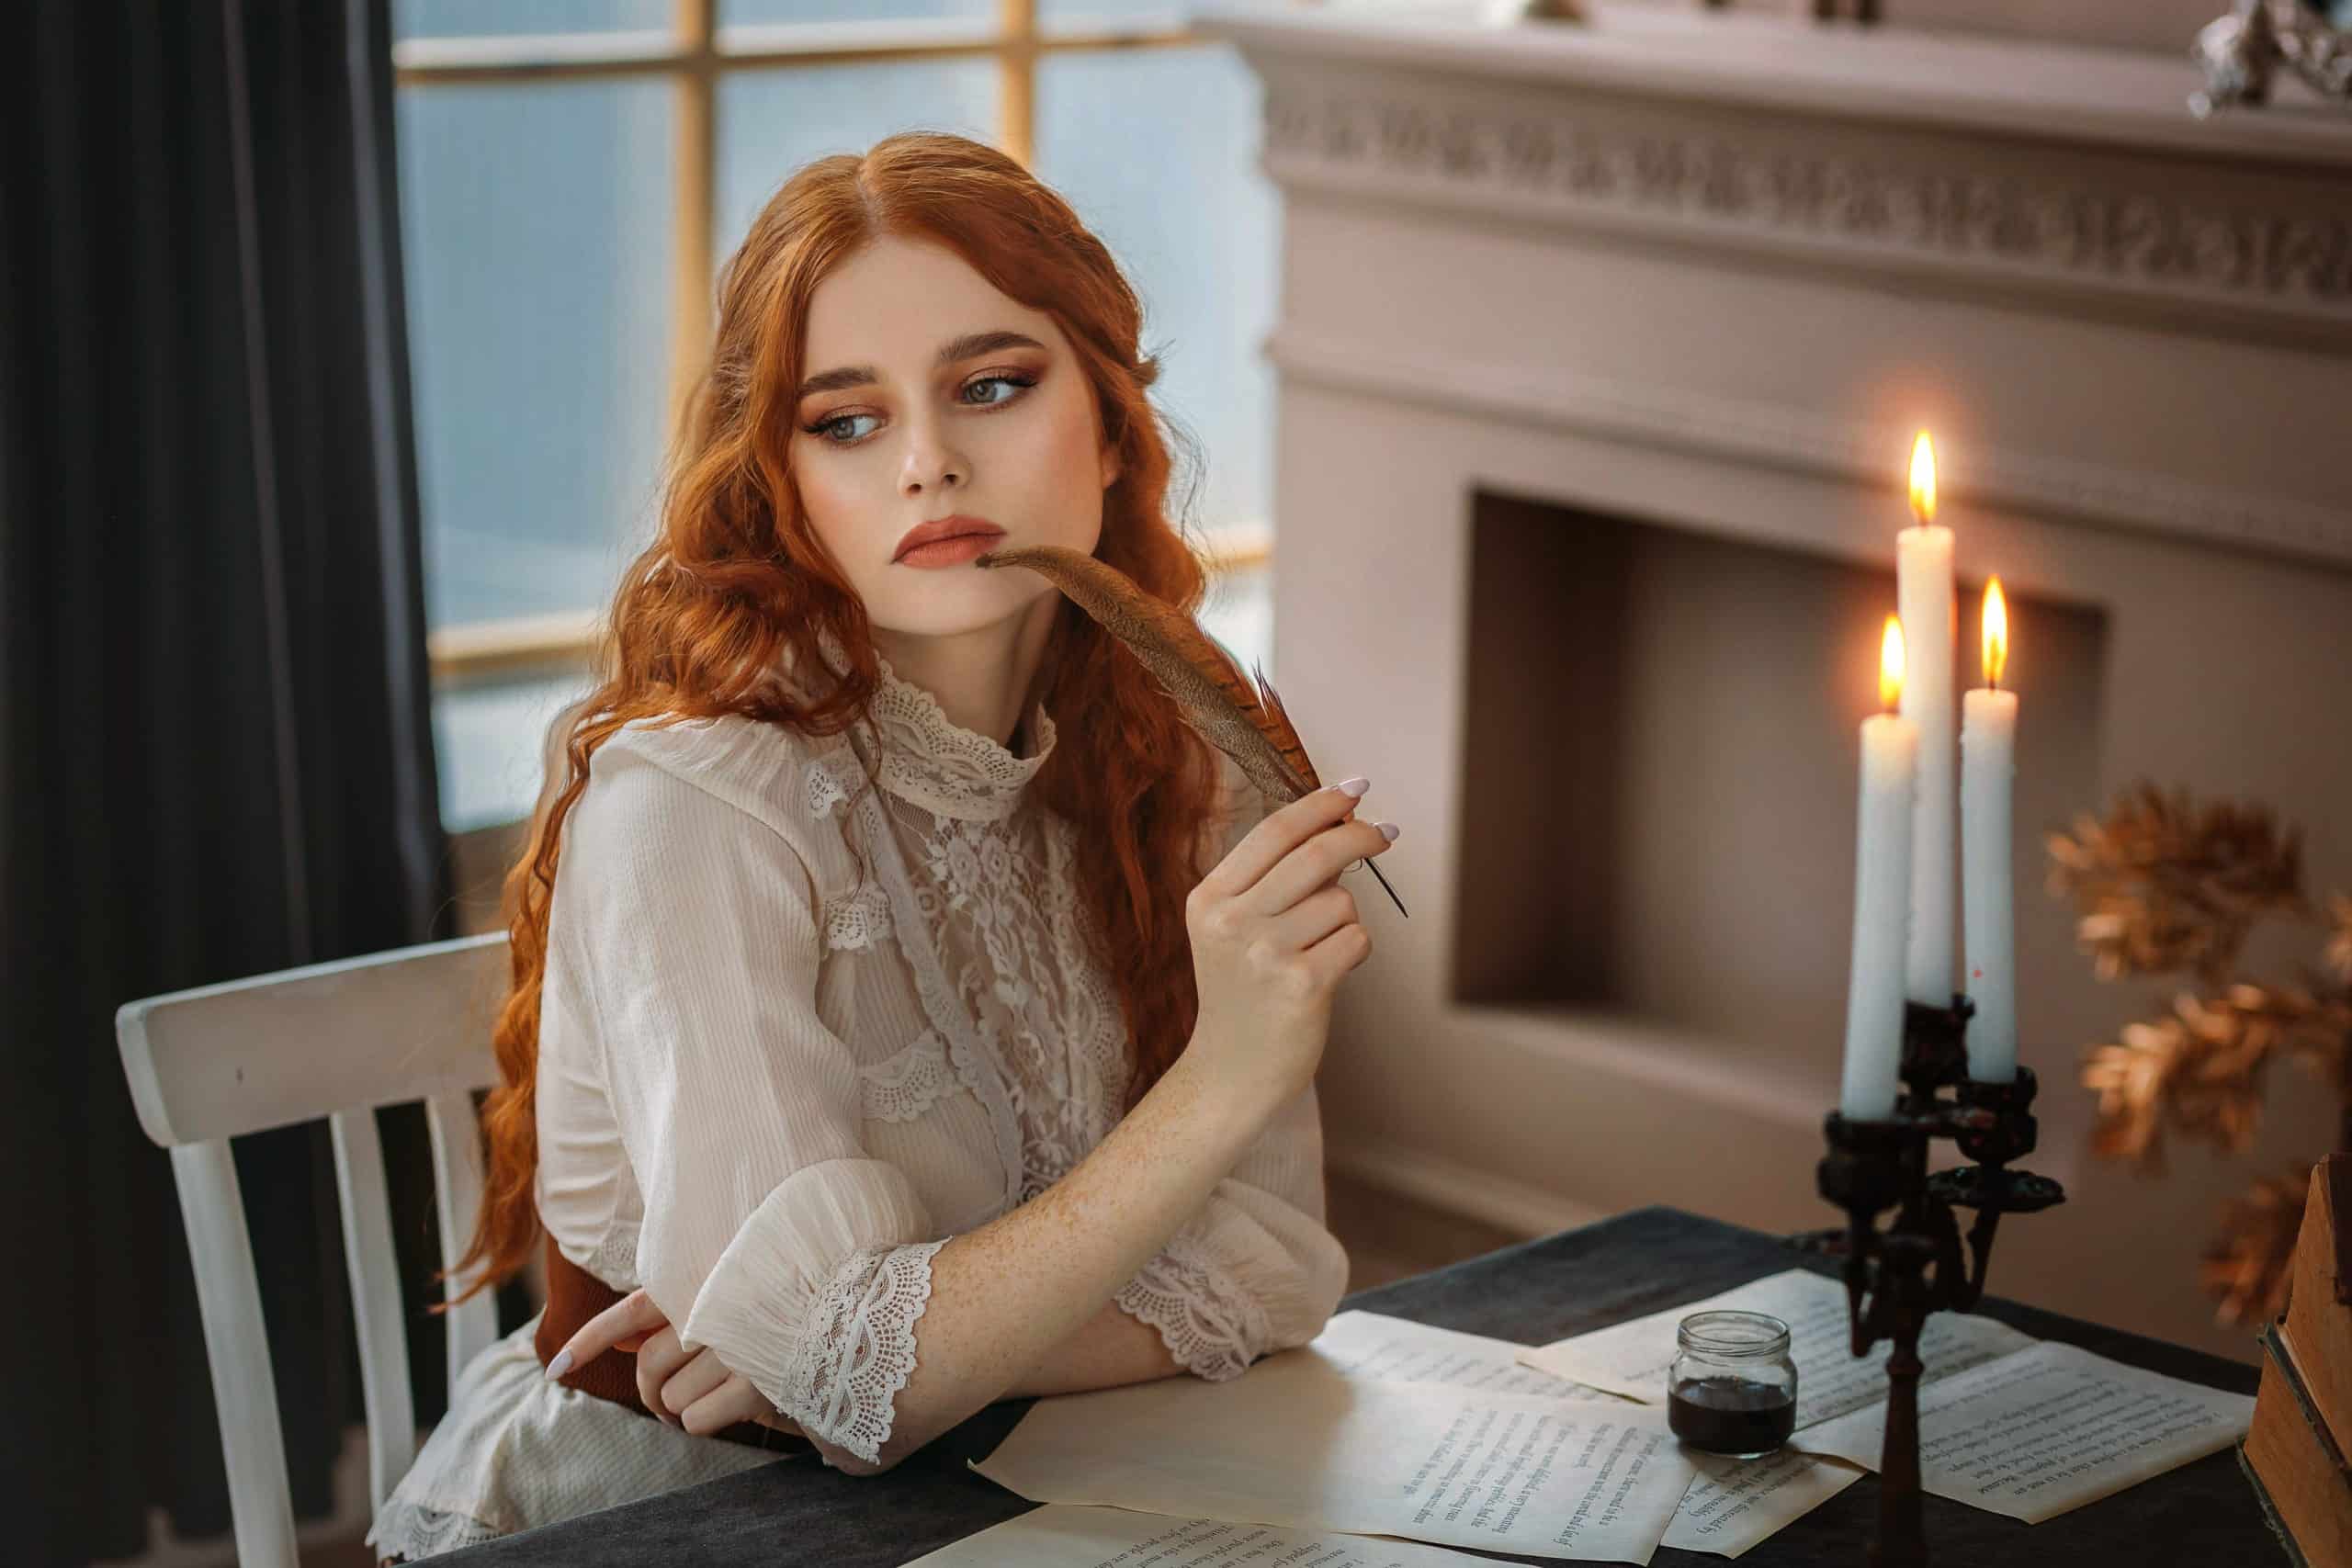 Medieval redhead lady sits at table writes with quill pen and vintage paper.